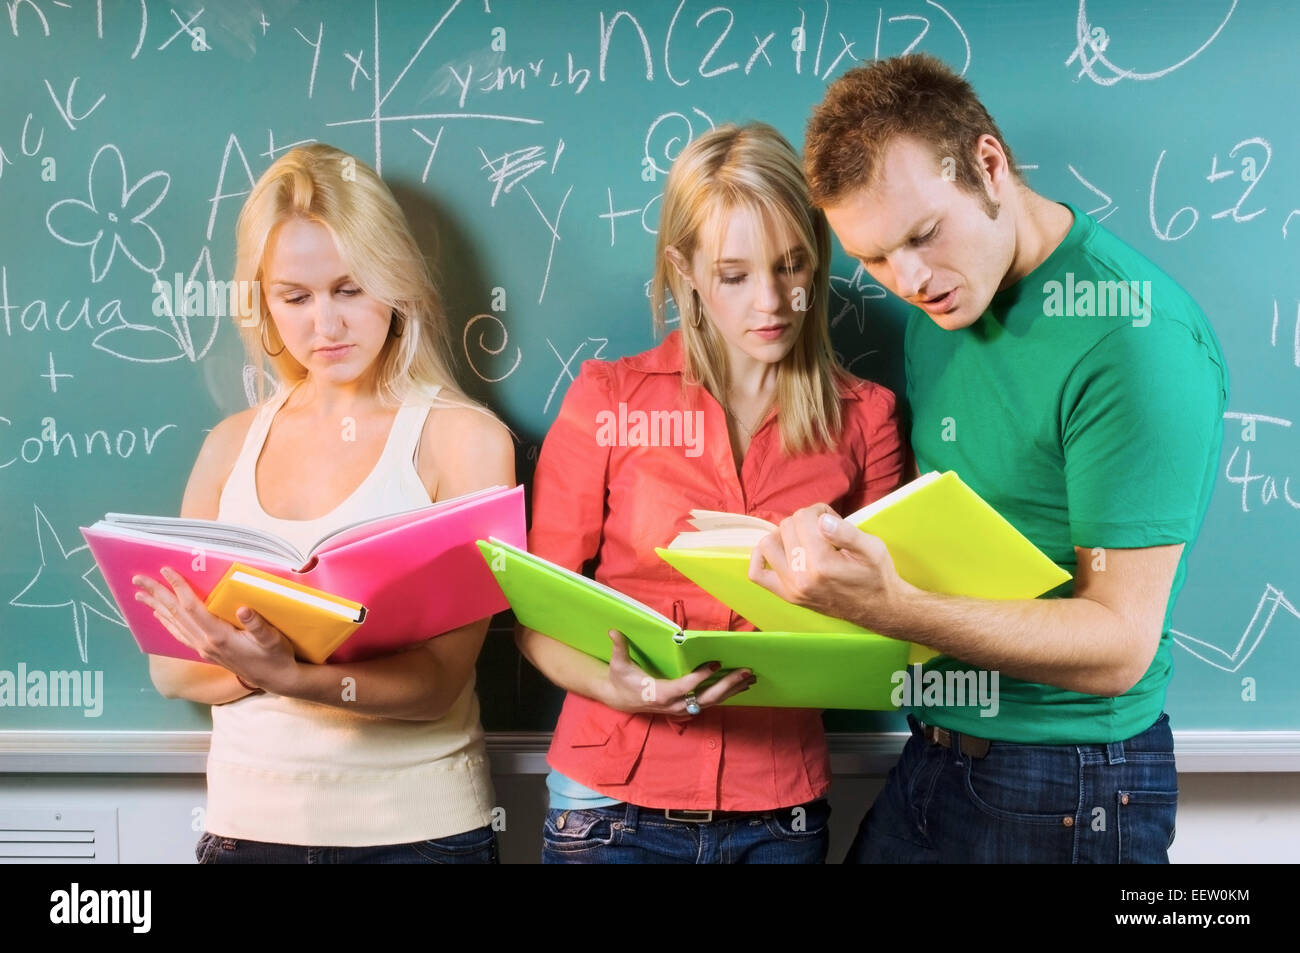 Three college students by a chalkboard Stock Photo